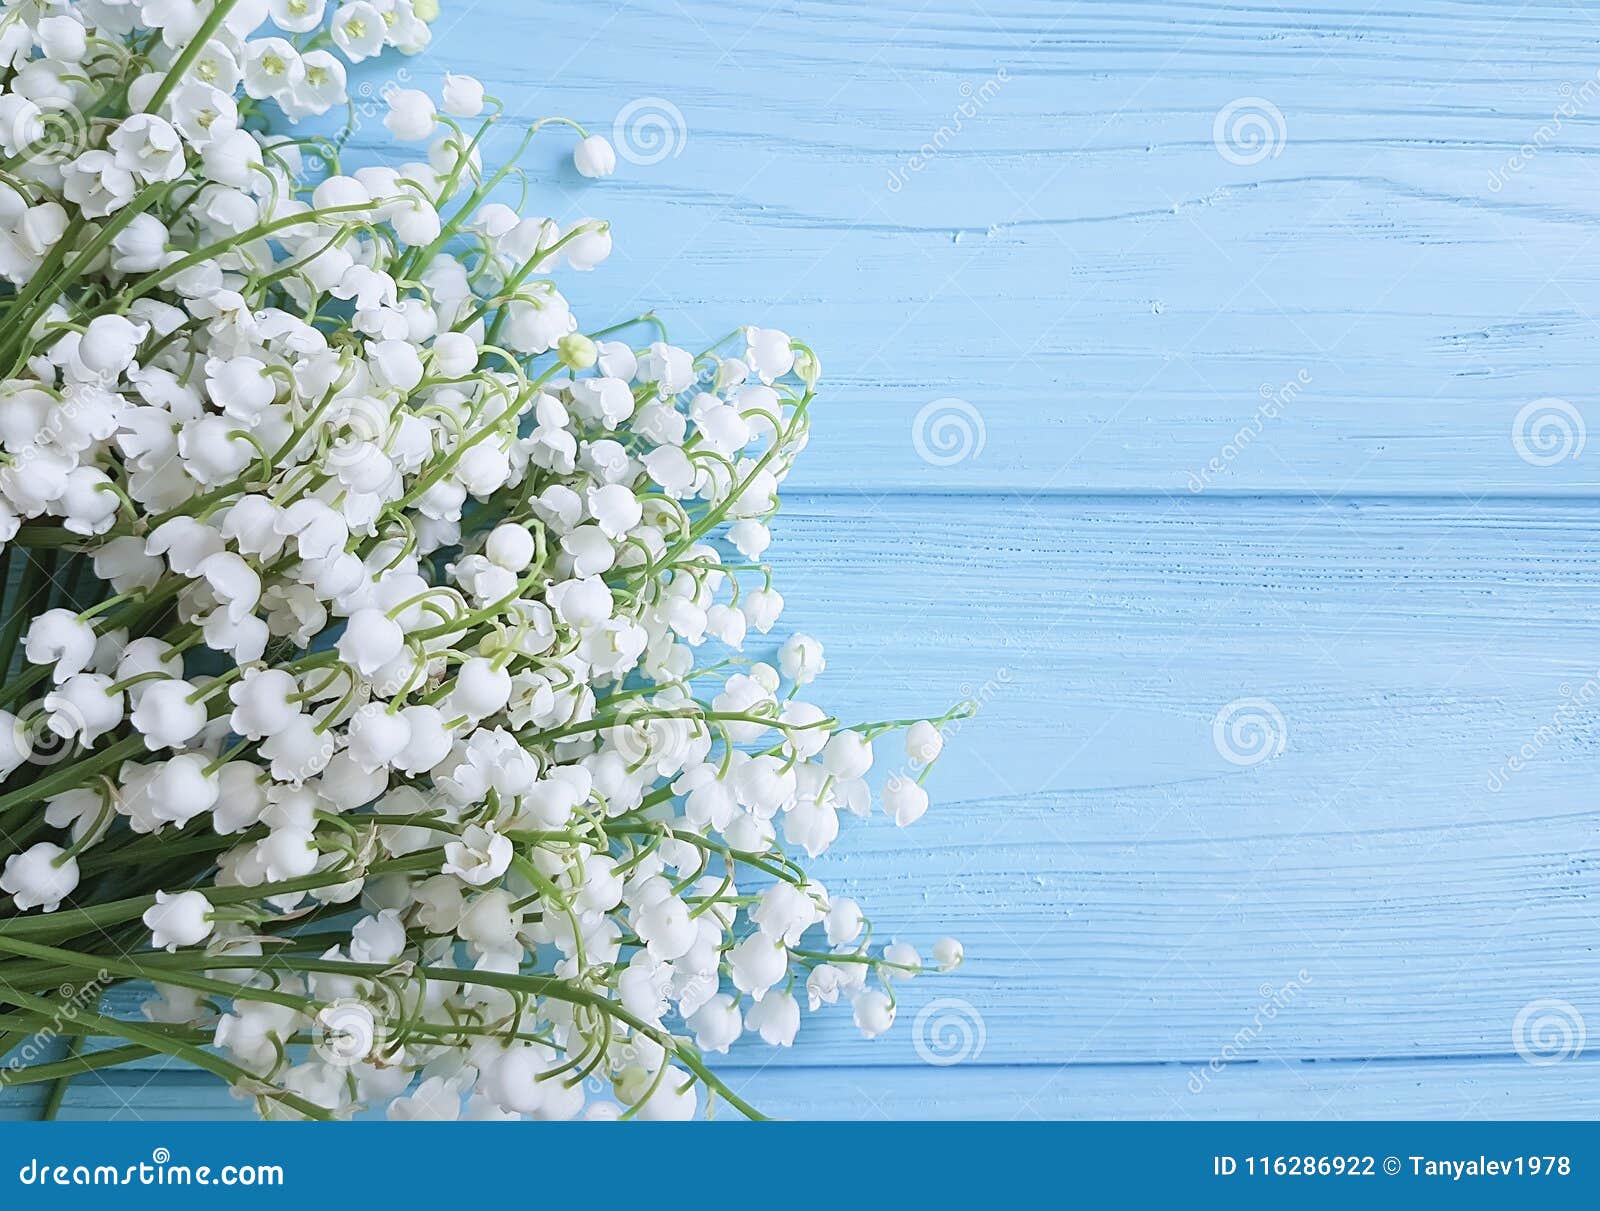 lily of the valley beautiful on blue wooden celebration decorative floral spring flowers greetings